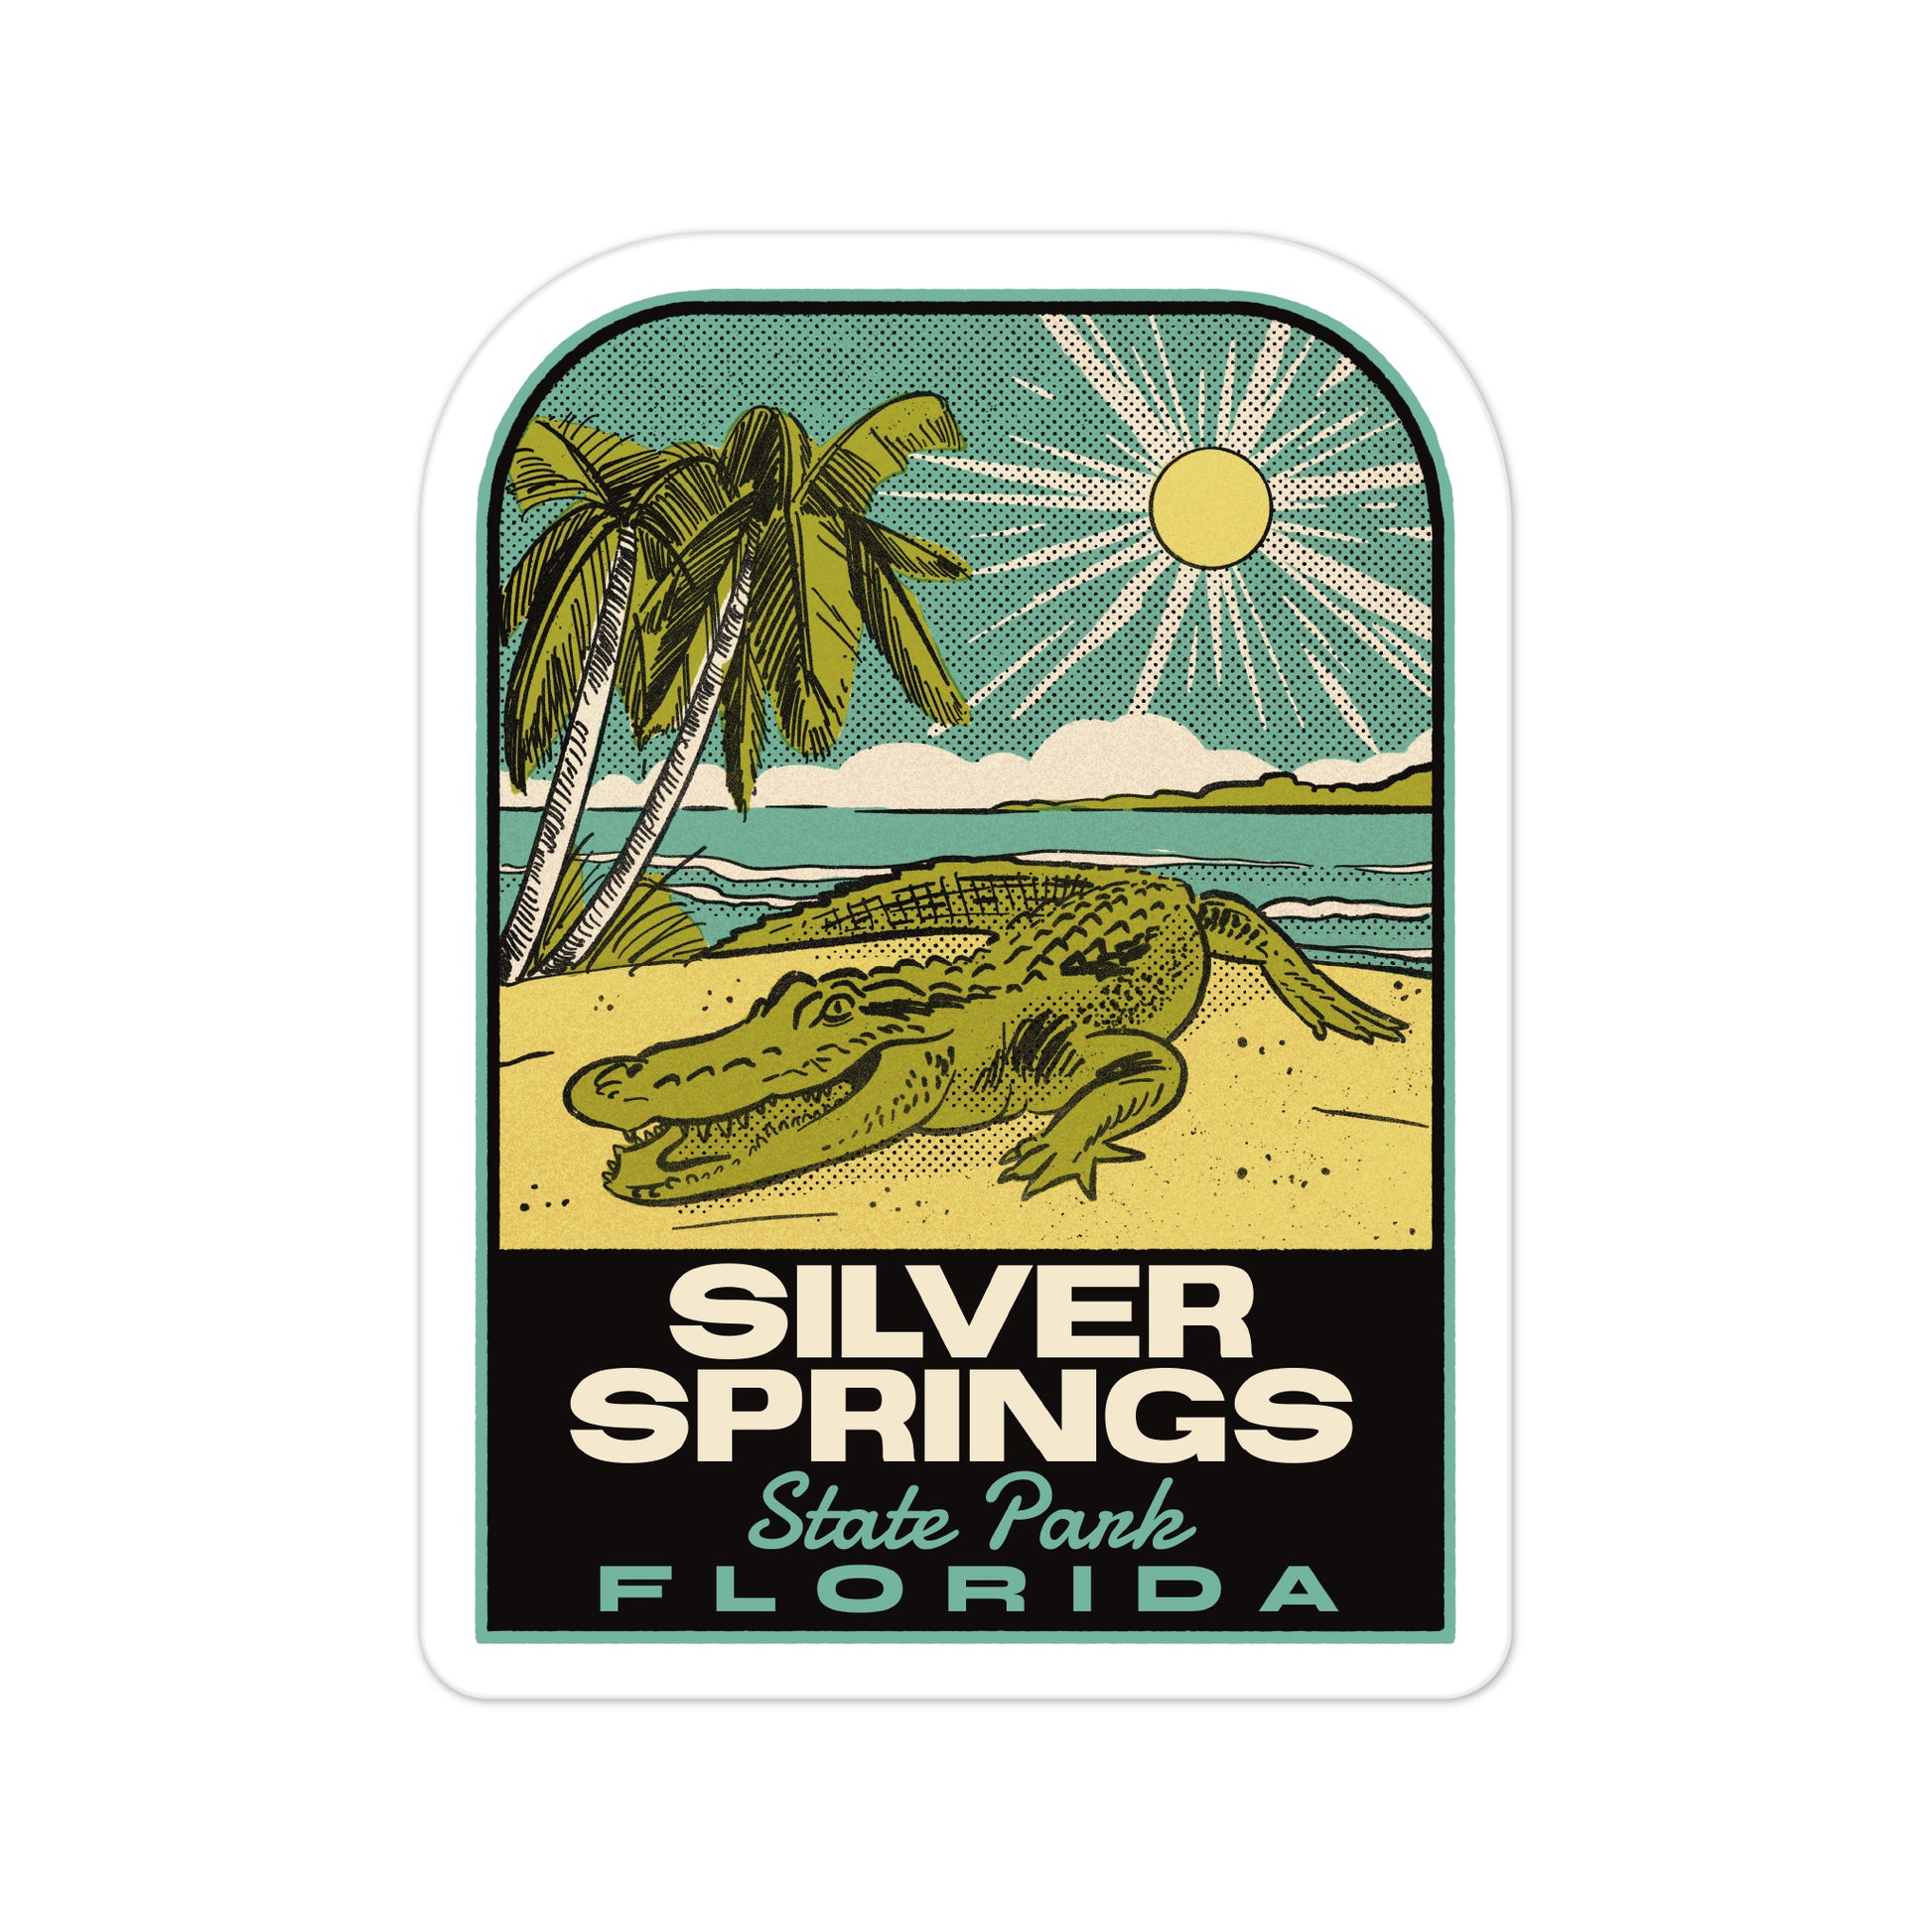 A sticker of Silver Springs State Park